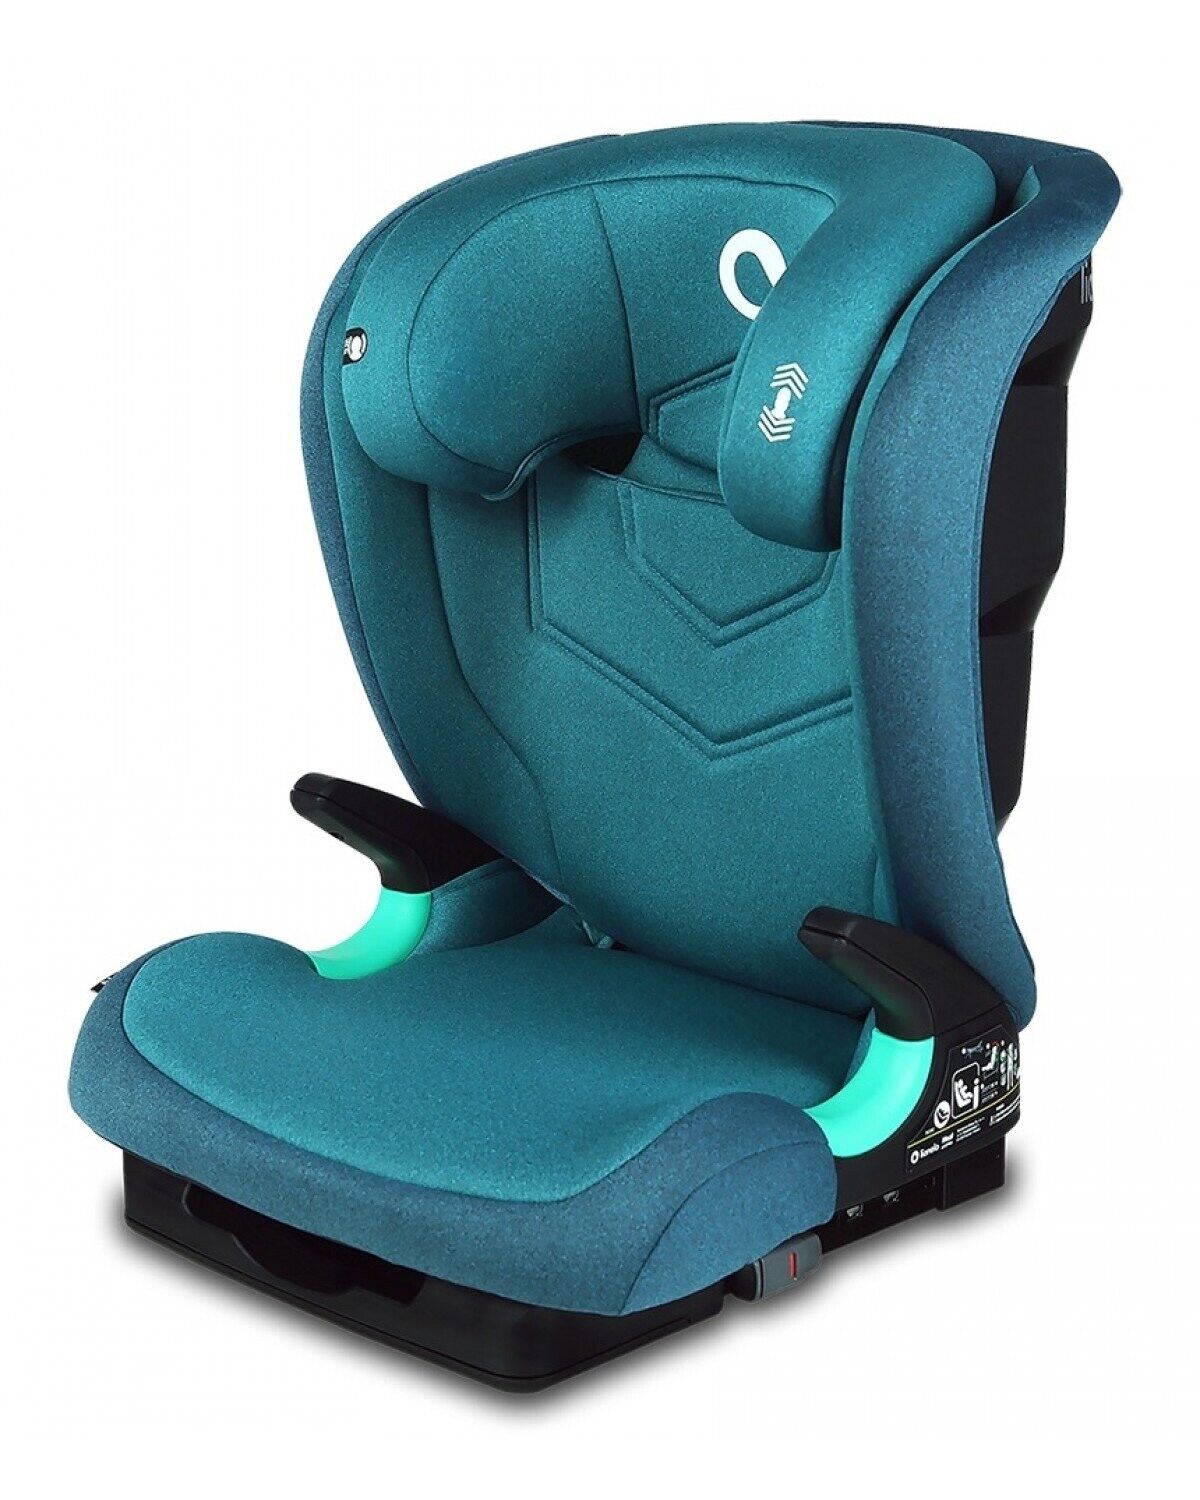 Green Turquoise Lionelo Car Seat ISOFIX Support Kids Child i-Size Neal 15-36 kg